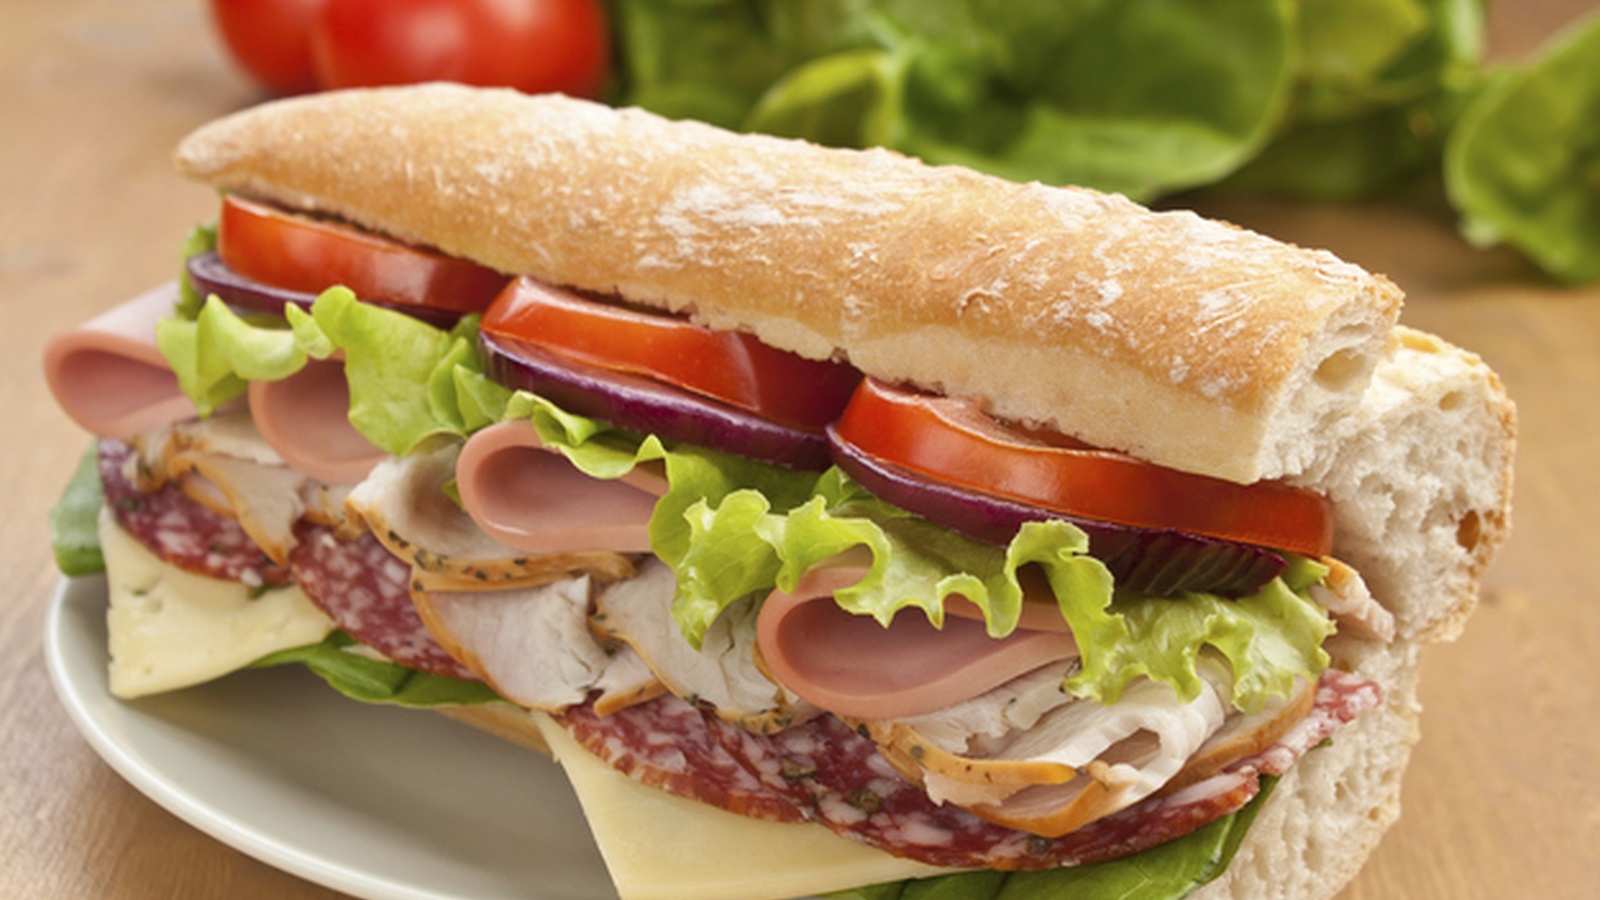 Subway quits artificial ingredients!